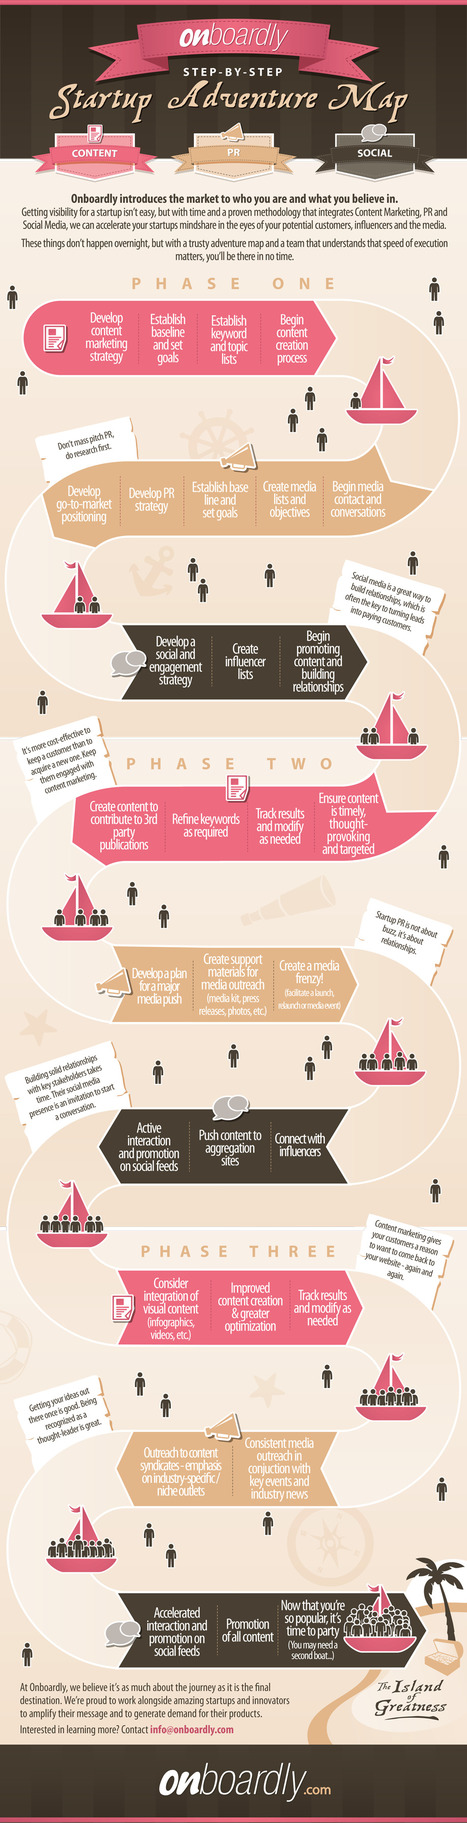 Steps On How to Acquire Customers For Your Startup [INFOGRAPHIC] | | Startup Revolution | Scoop.it